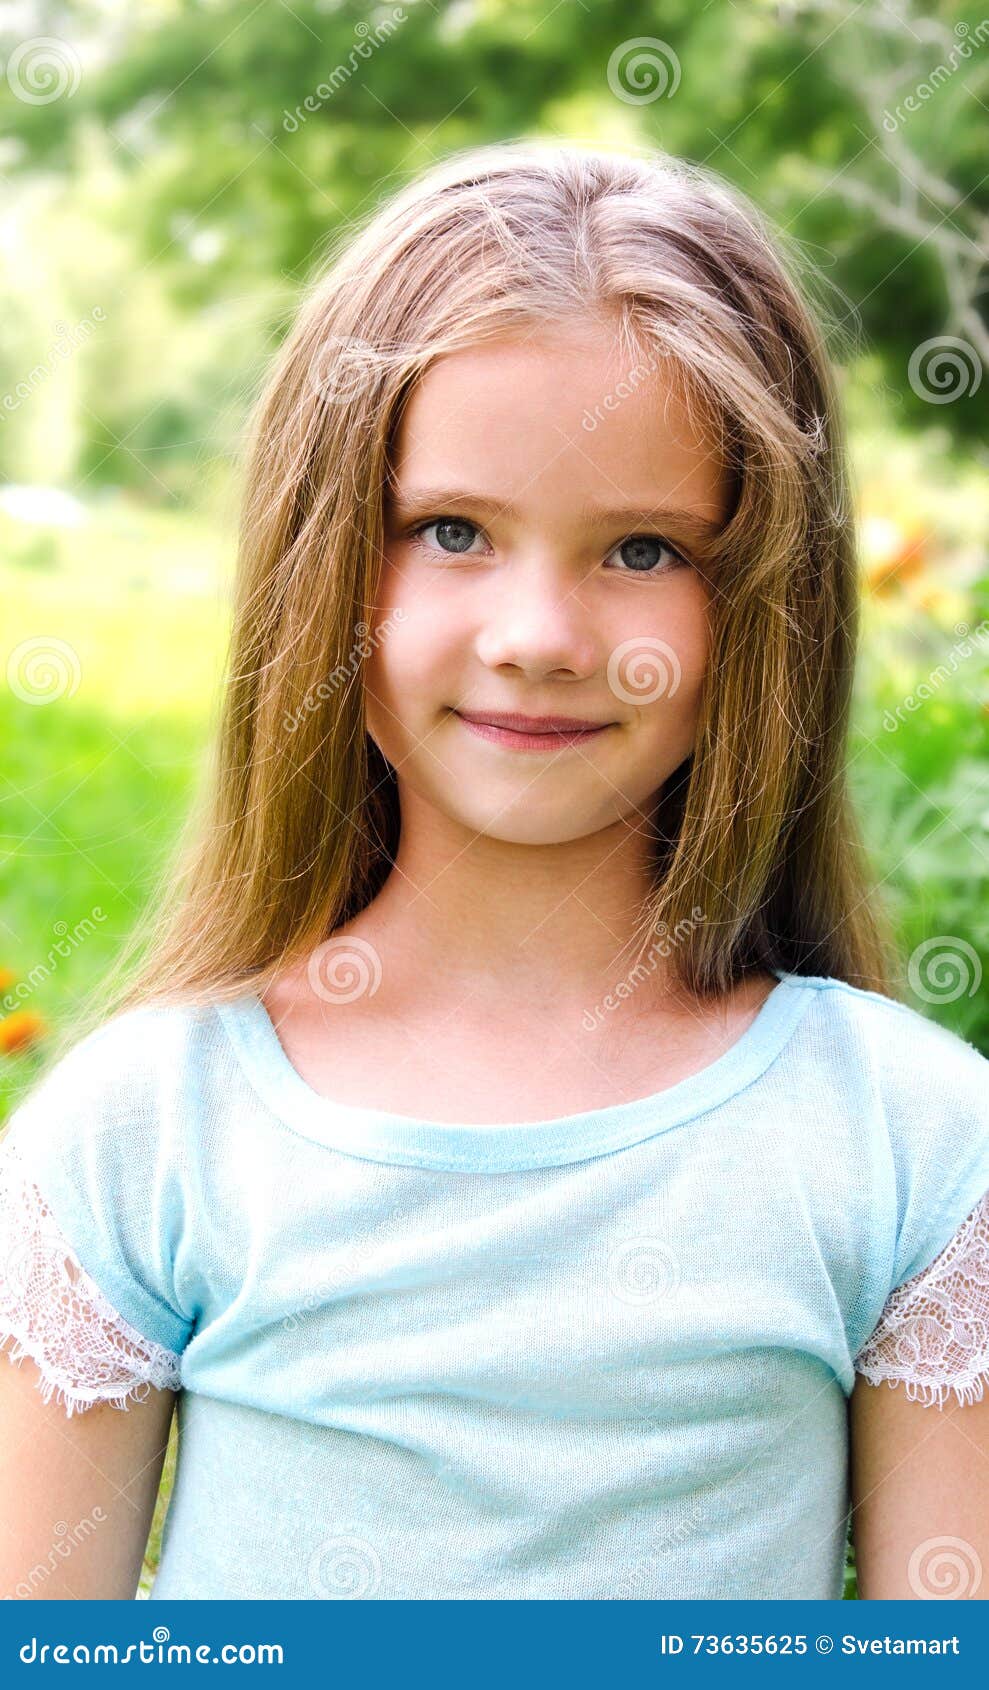 Portrait of Smiling Cute Little Girl in Summer Day Stock Image - Image ...